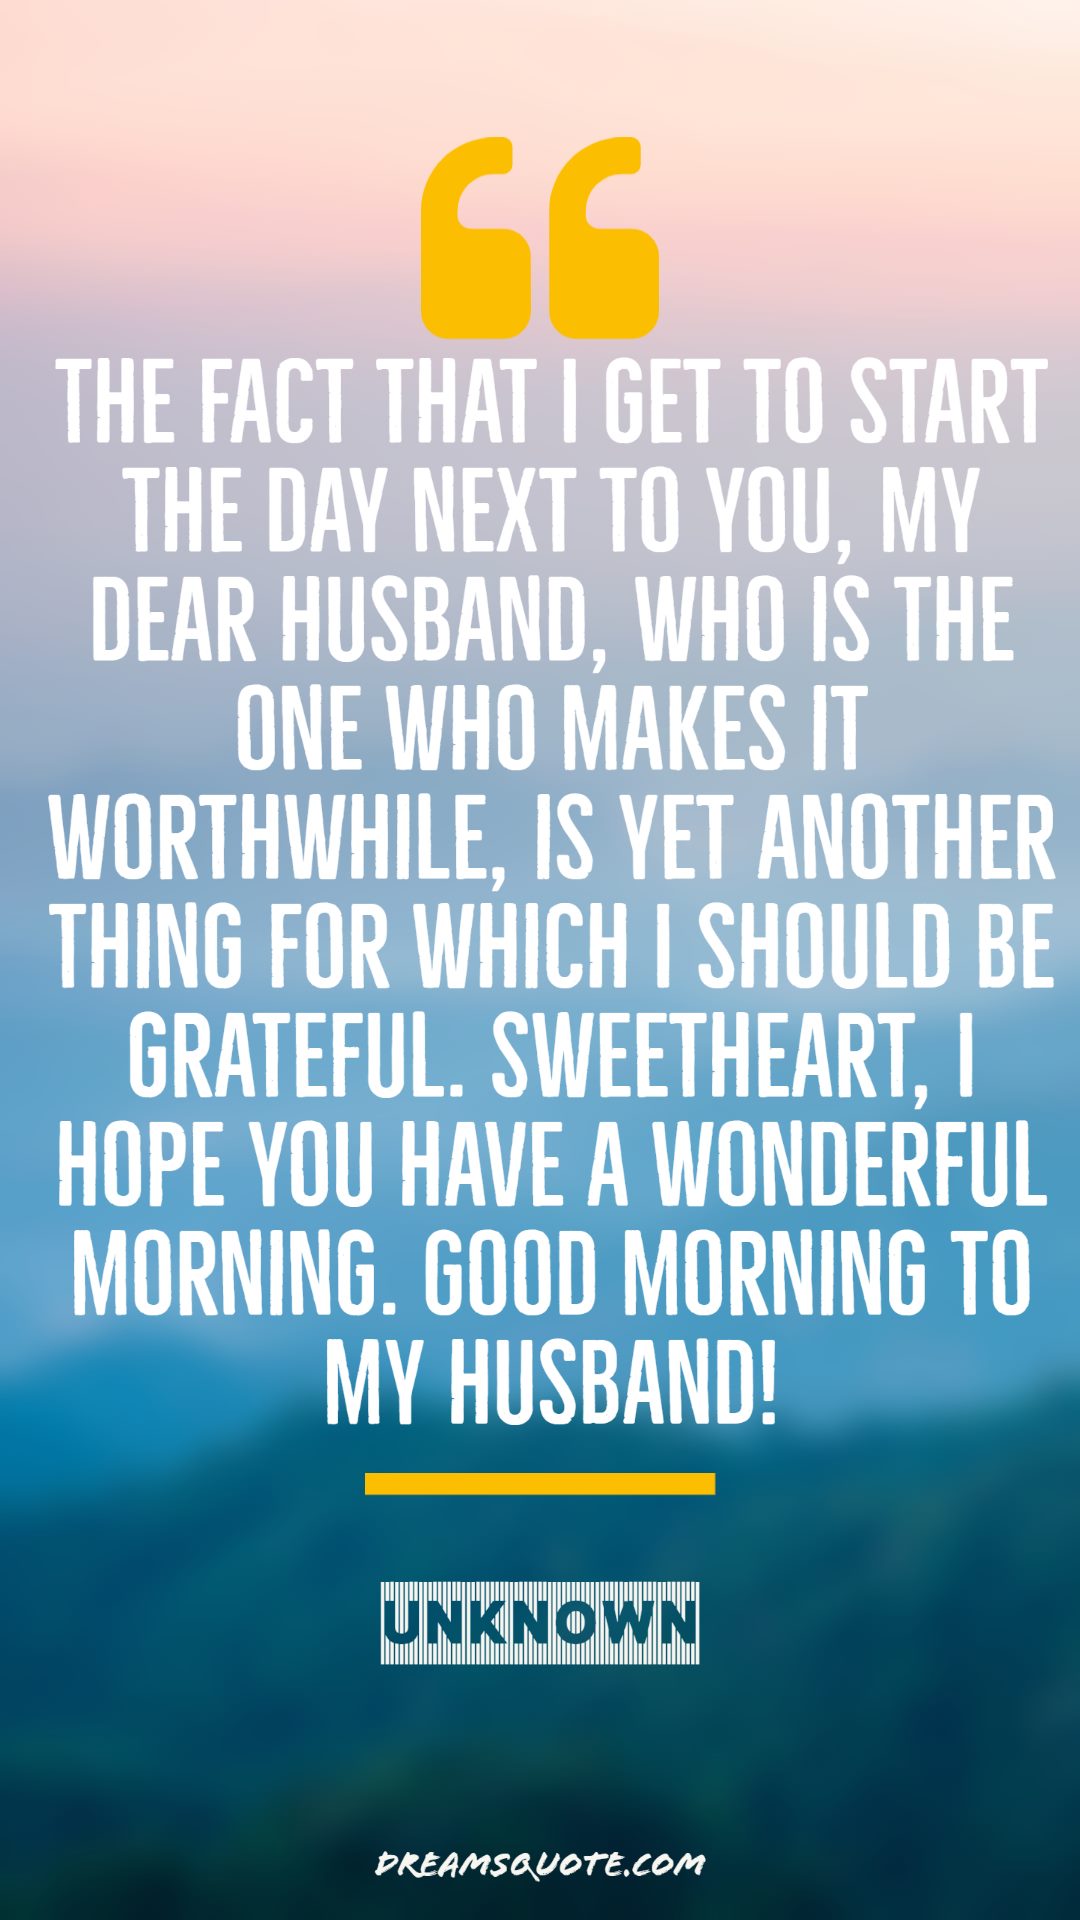 good morning images for husband and quotes